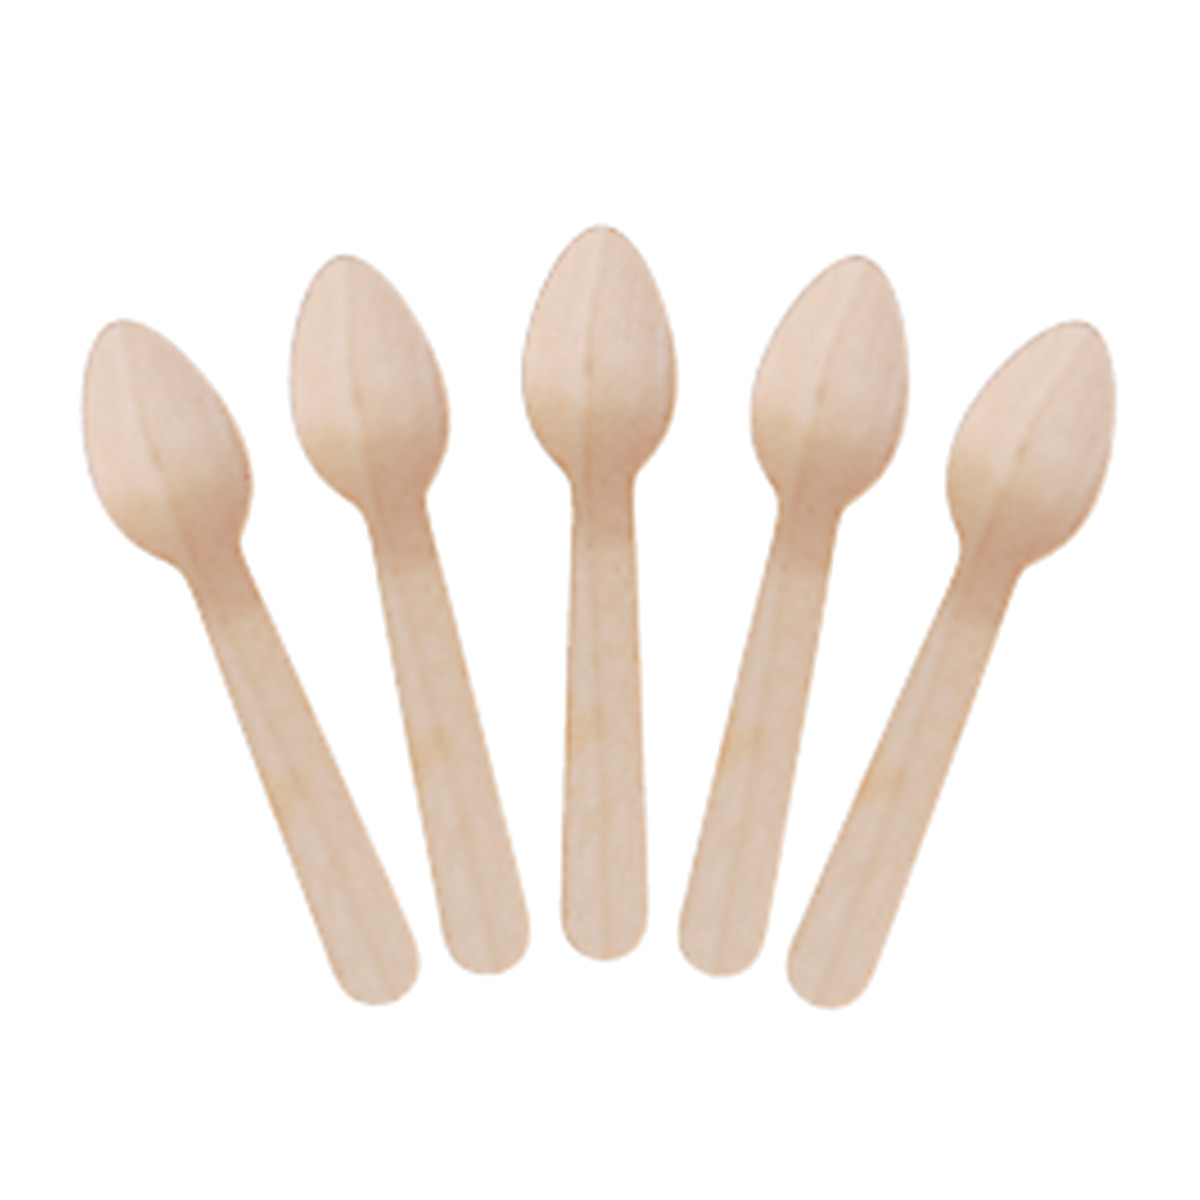 consumables-and-hospitality-packaging-wooden-teaspoon-x1000-carton-envirocutlery-wooden-teaspoon-alternative-to-plastic-disposables-sustainably-sourced-birchwood-vjs-distributors-hawkes-bay-nz-CA-WCT